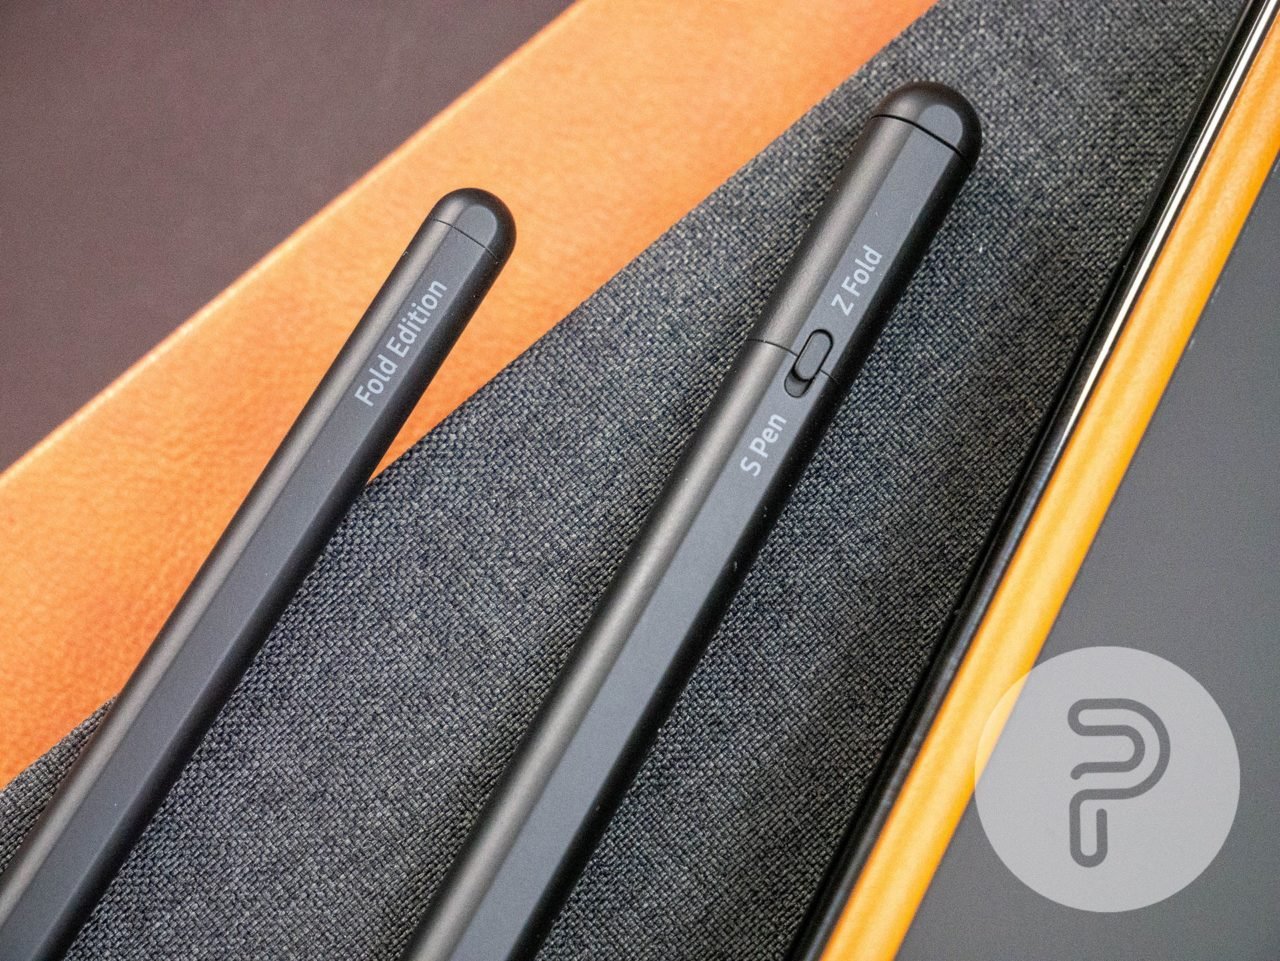 Does the Samsung Galaxy Z Fold 3 support the S Pen?